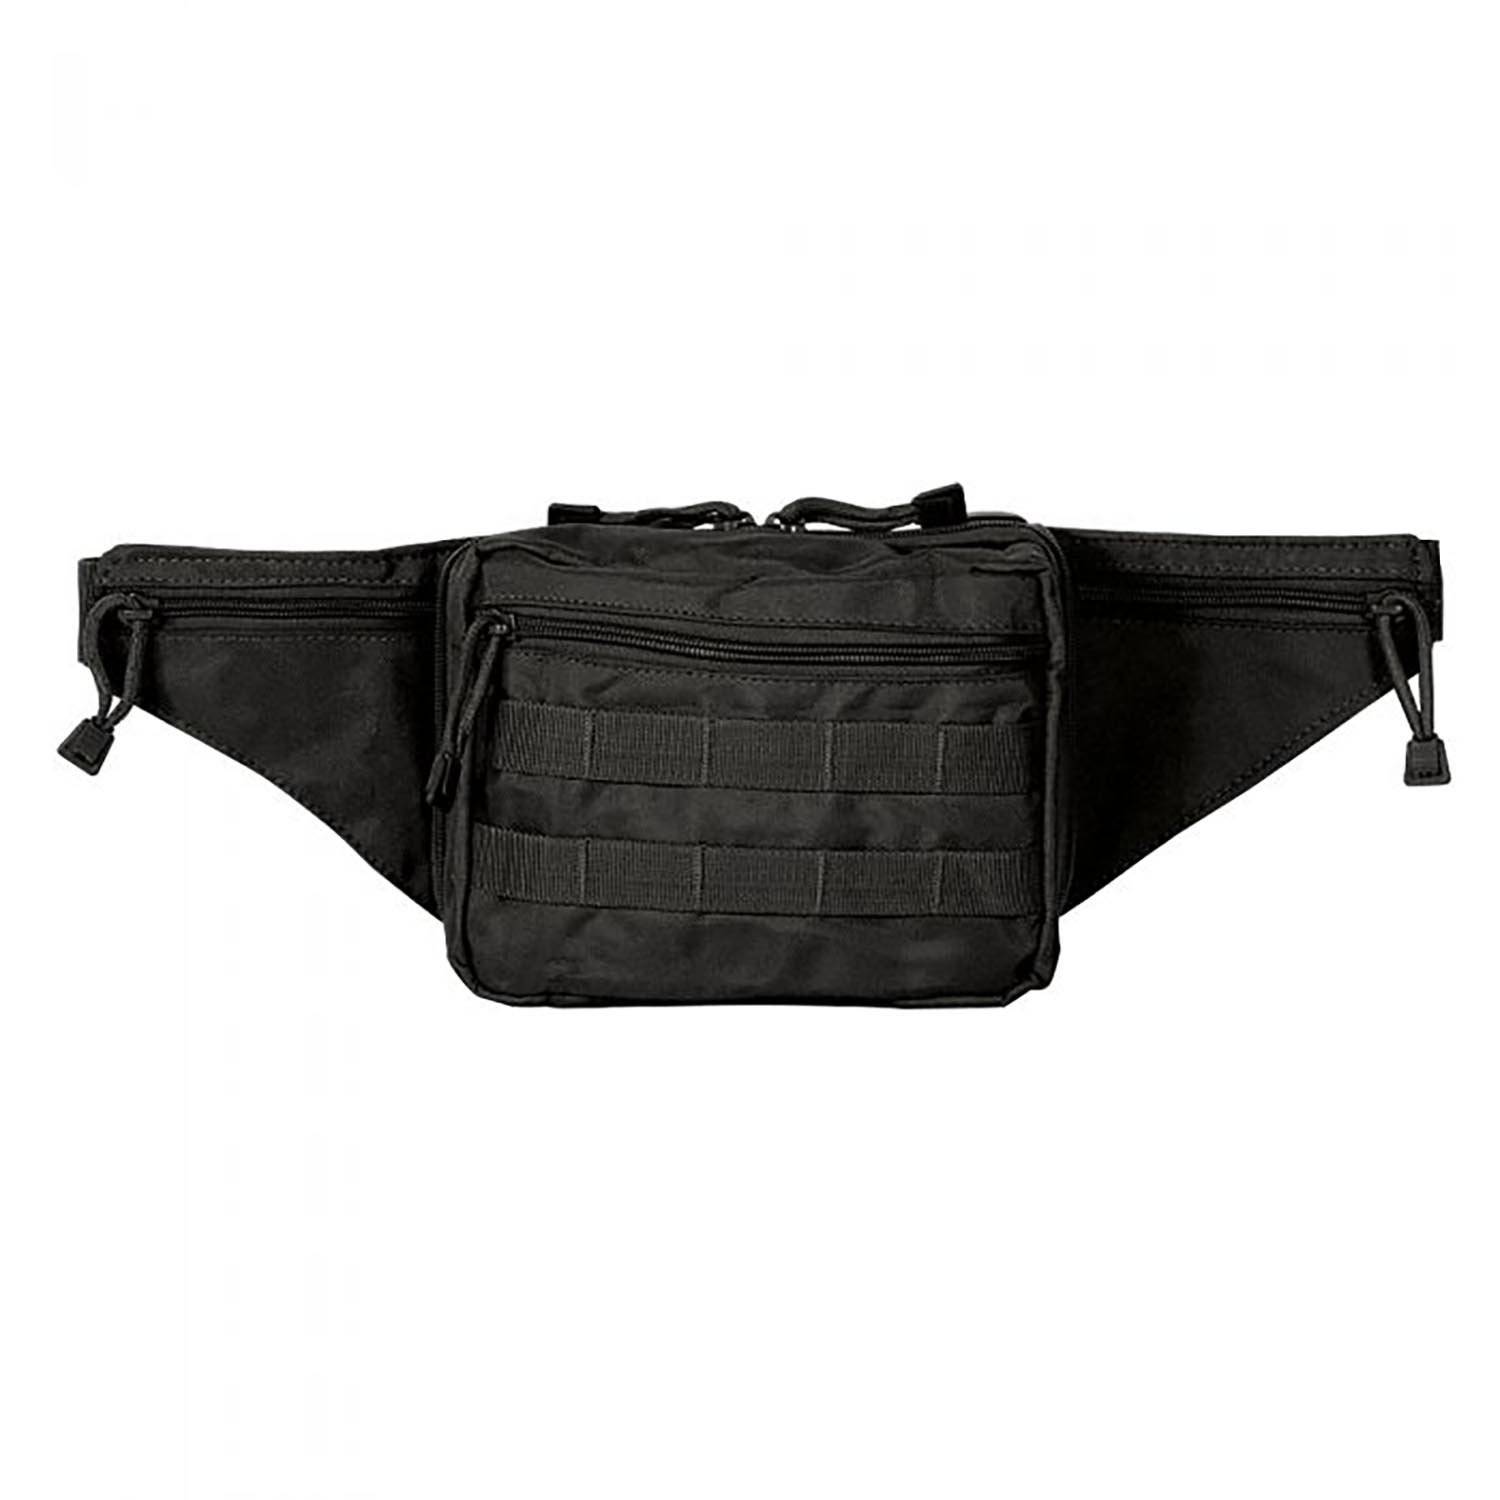 VooDoo Tactical Hide-A-Weapon Fanny Pack